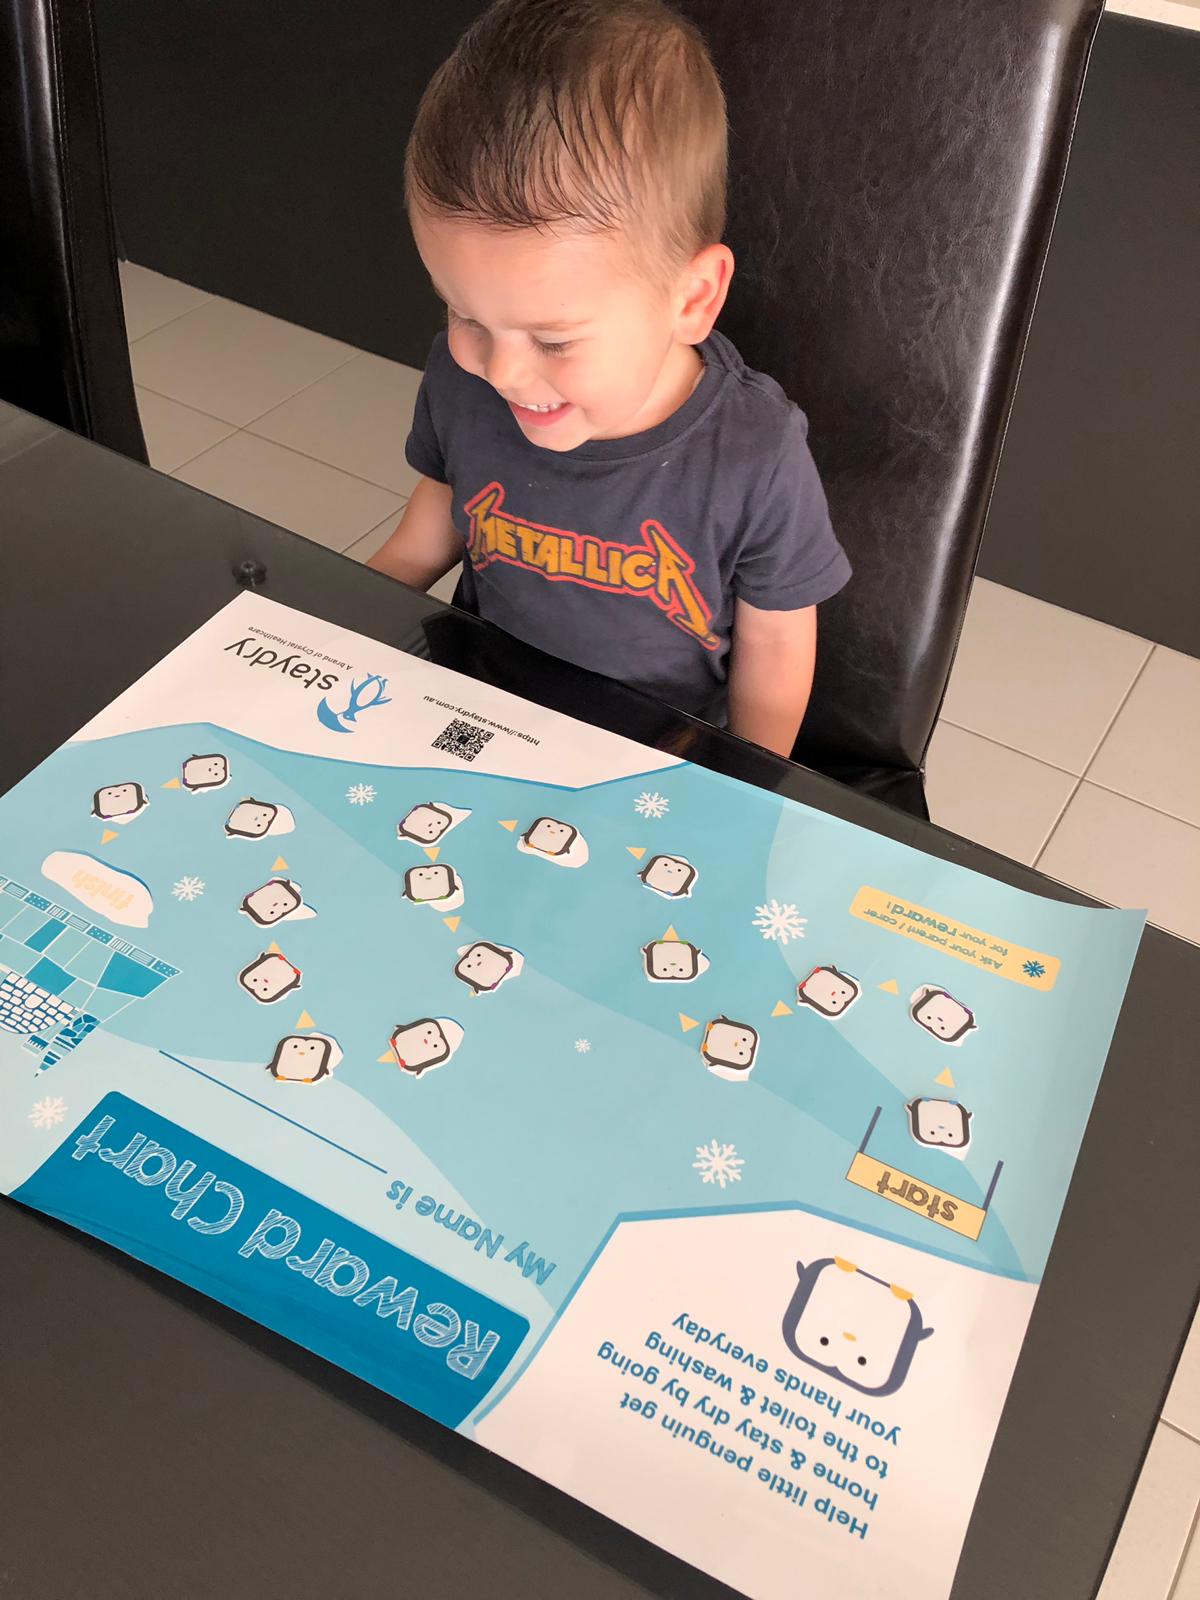 Little boy smiling at his toilet training chart.